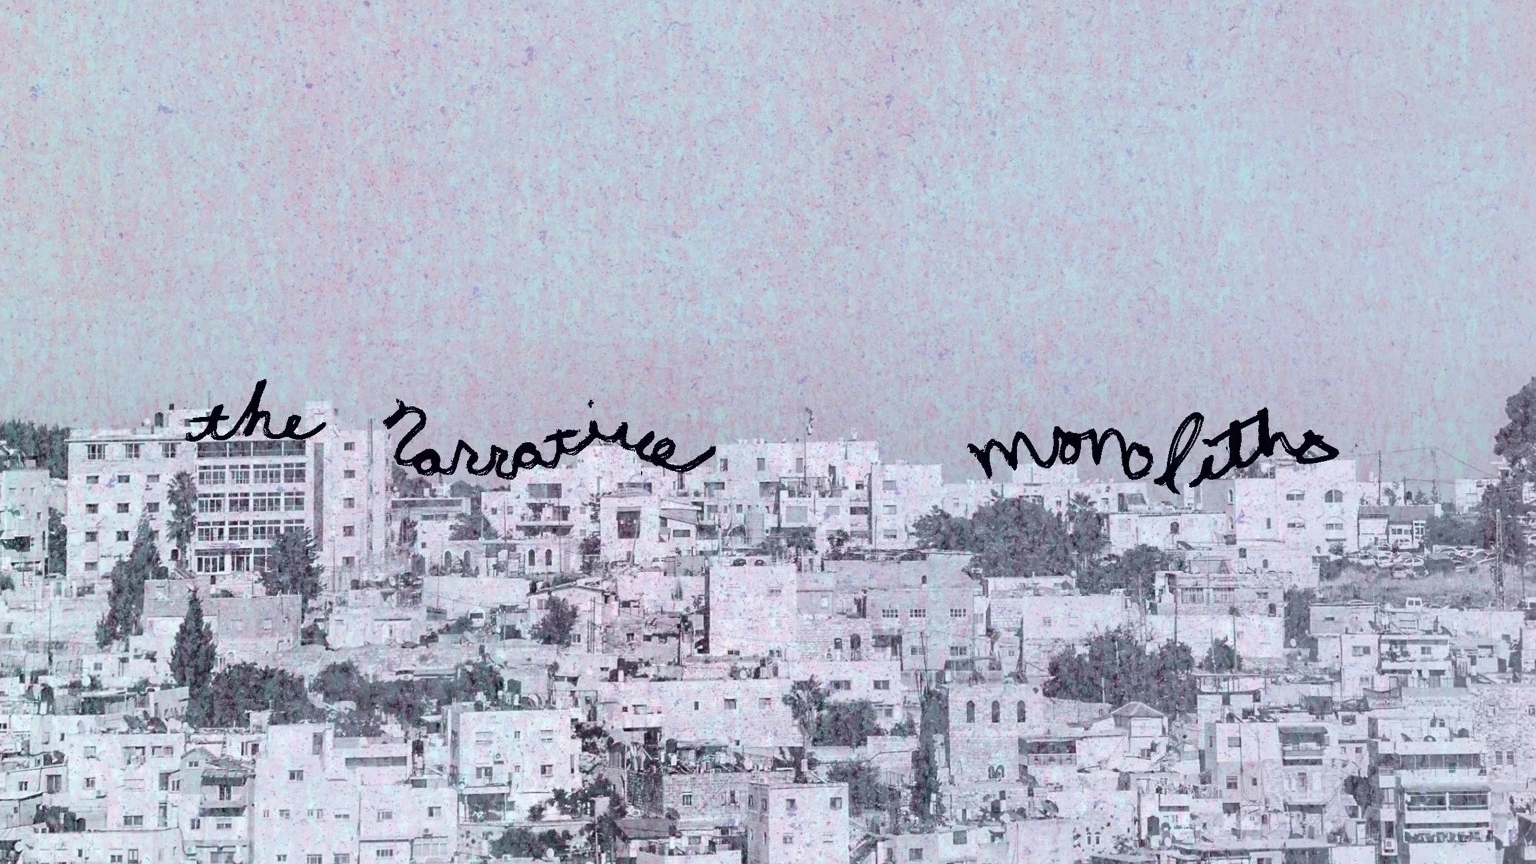 Contains black and white panorama of city with buildings on a hill with the narrative monoliths written on top of the first row of buildings